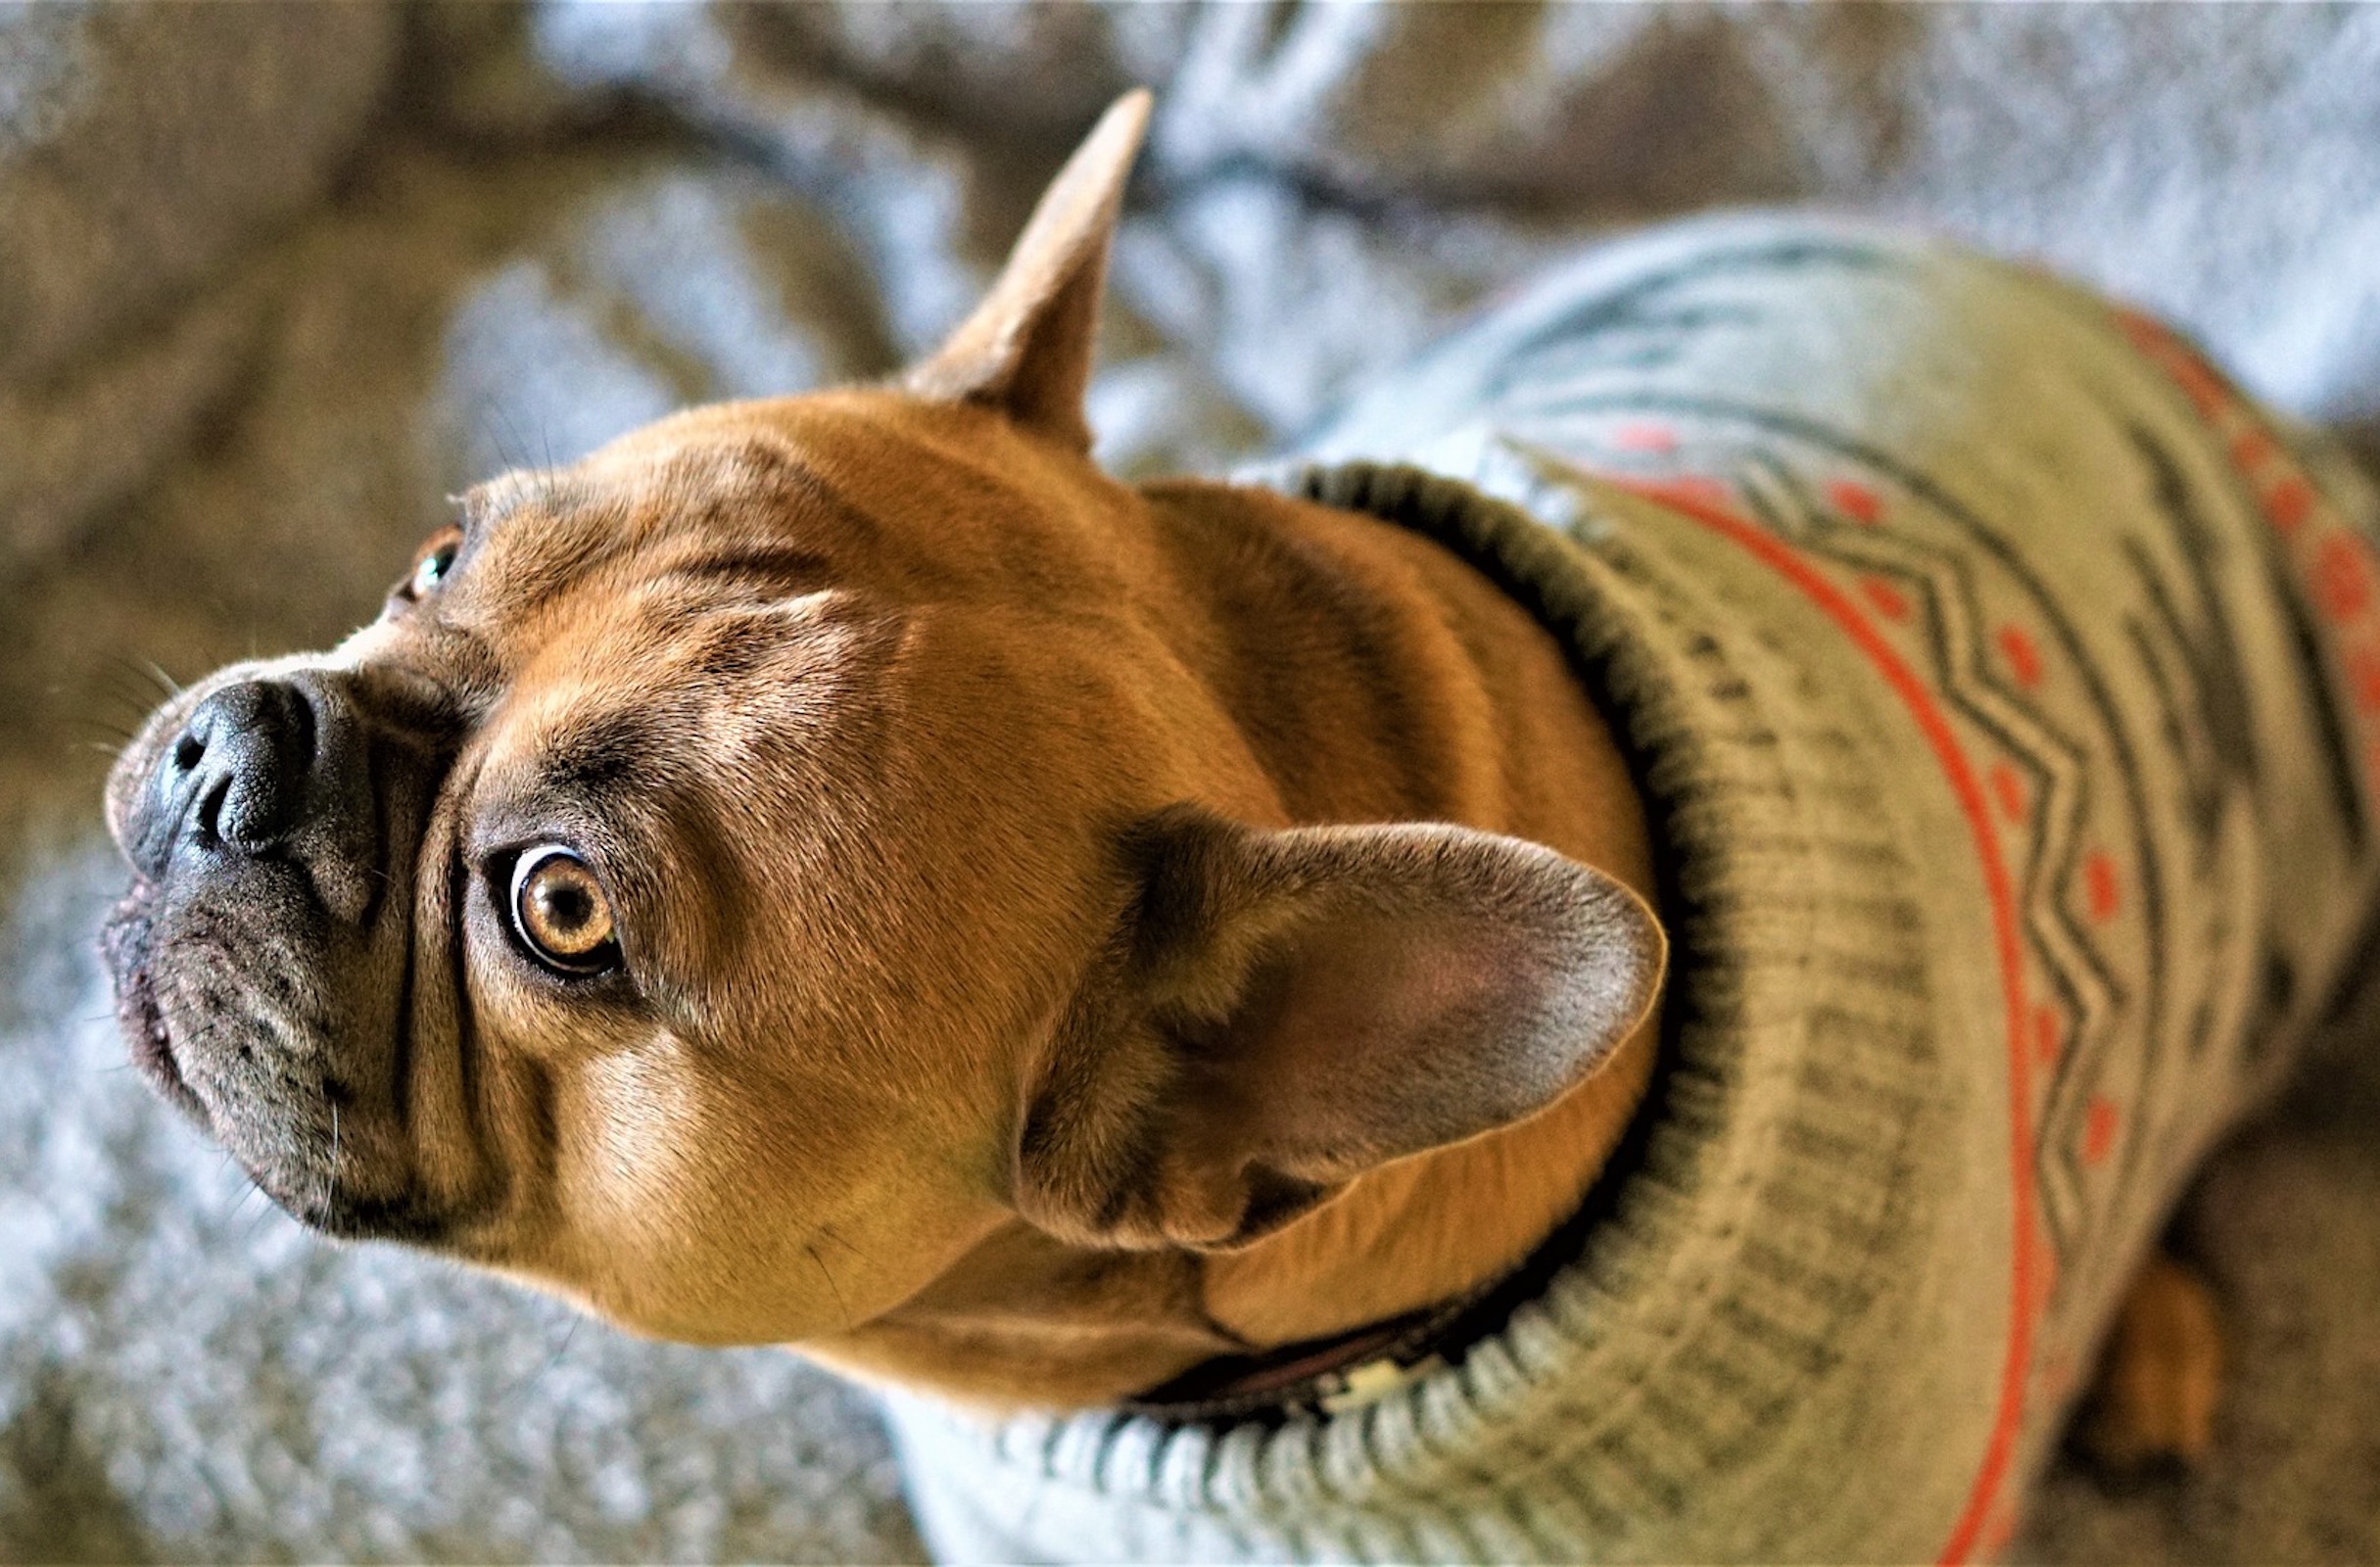 A brown French bulldog wearing a sweater looks up